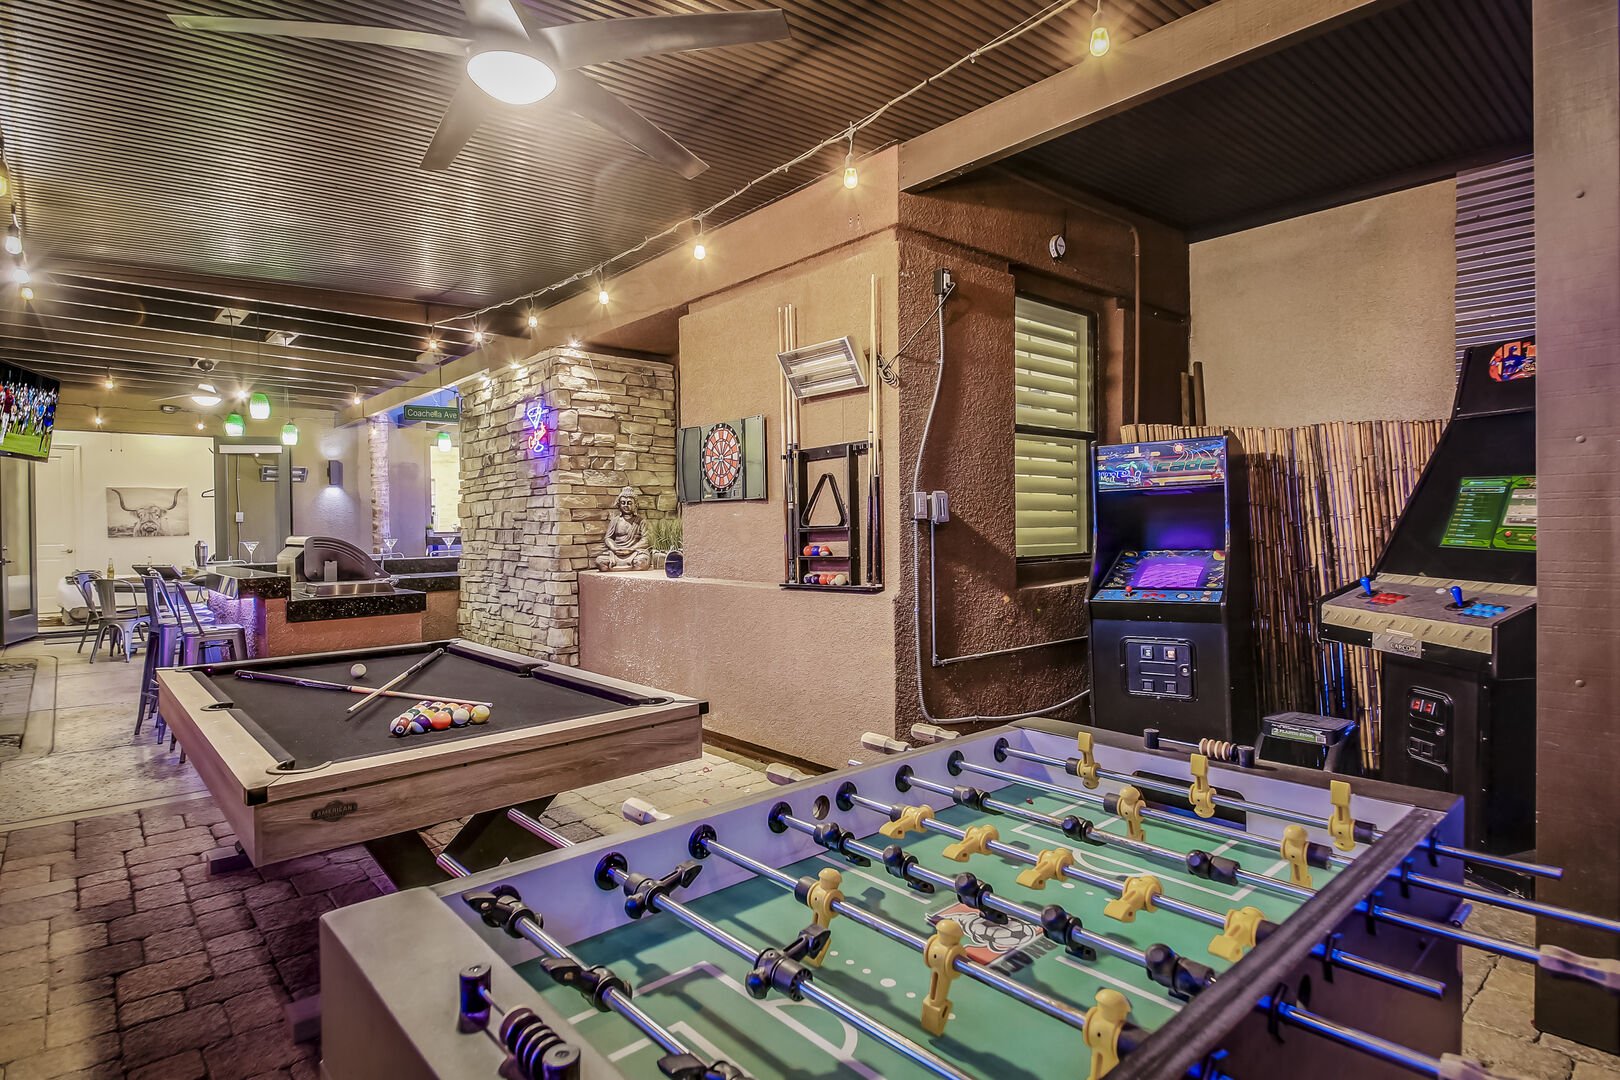 The game area is perfect for kids and adults! Enjoy a game of Pool or table foosball, or simply enjoy your beer on the bar-height table with seating for two.